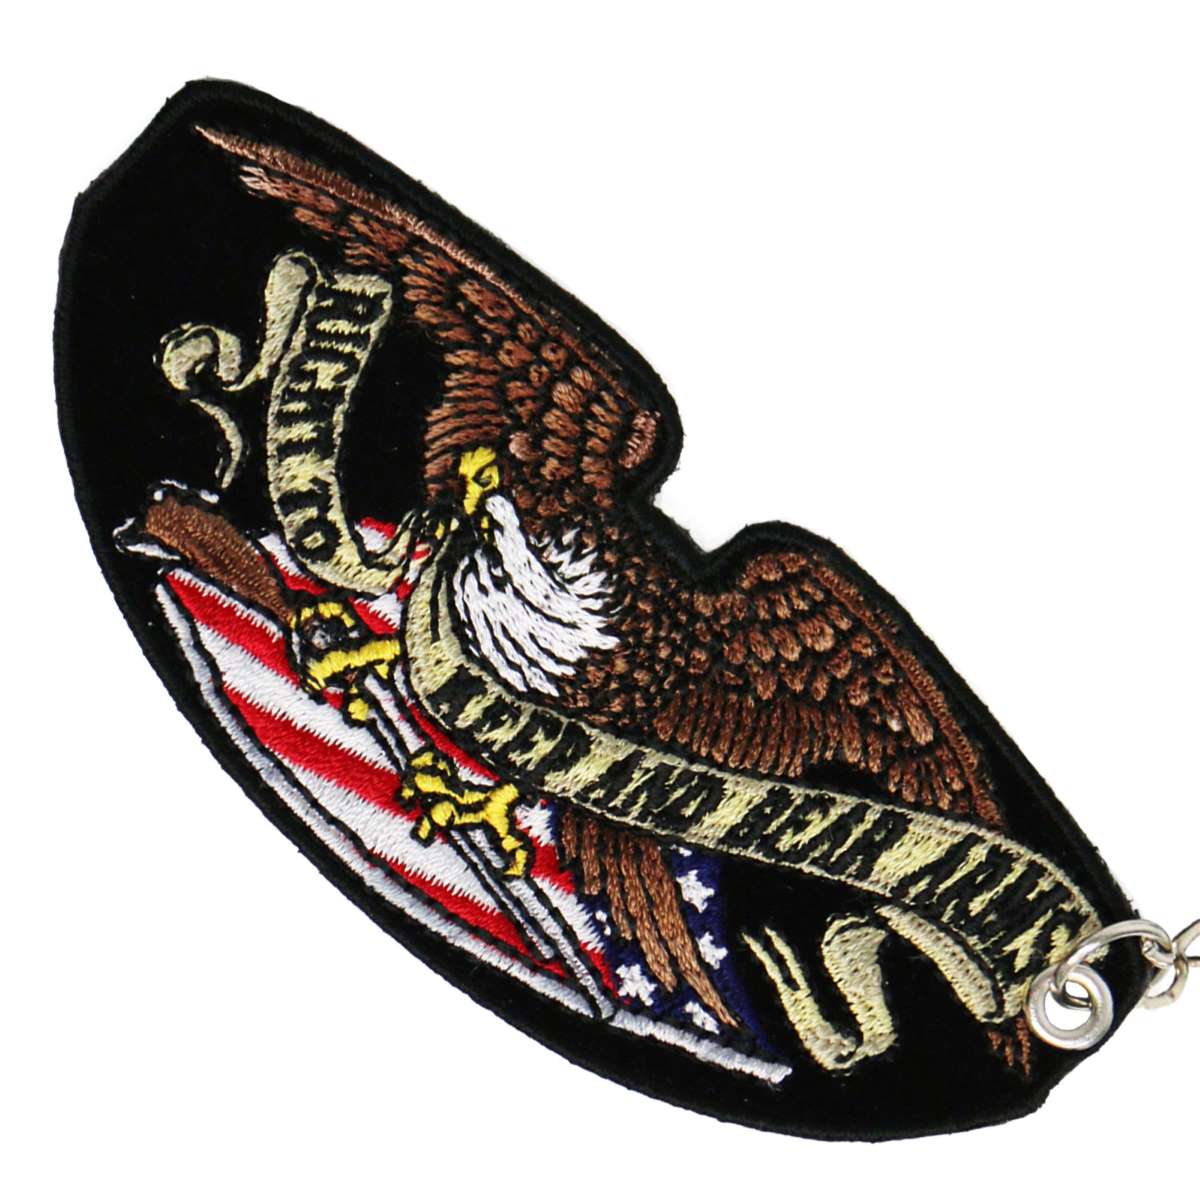 Hot Leathers Armed Eagle Embroidered Key Chain KCH1031